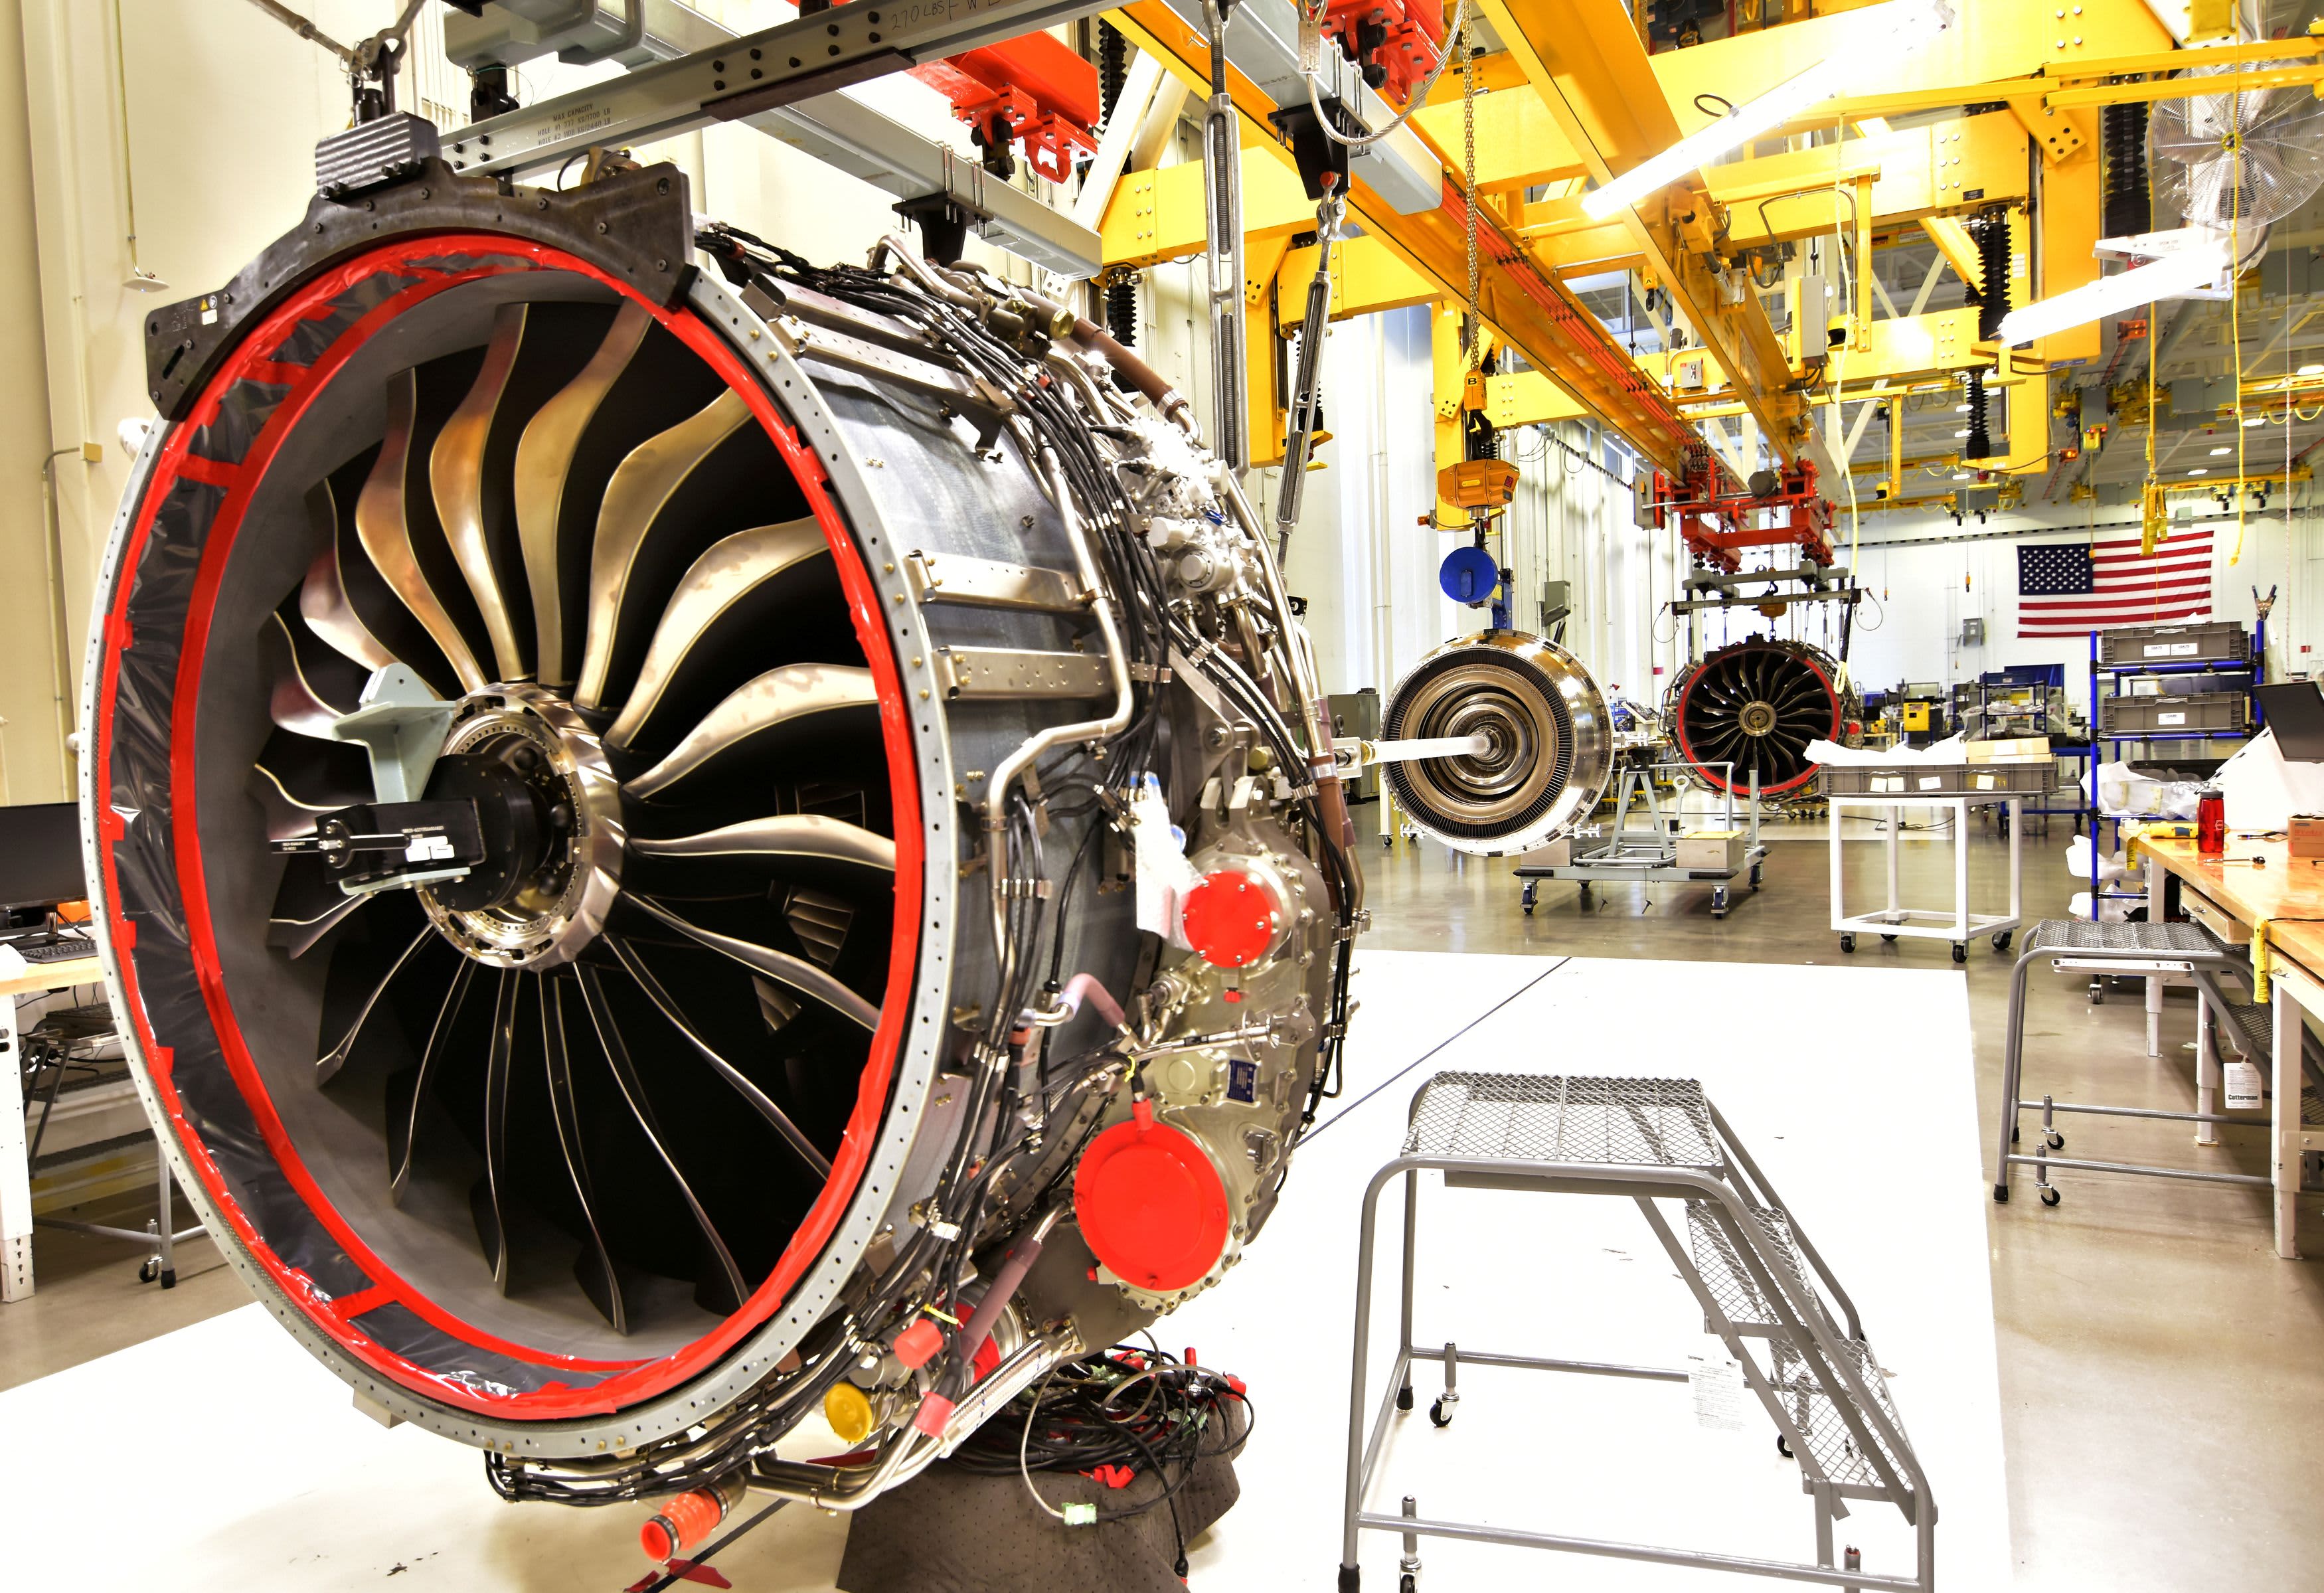 GE aircraft leasing unit to match rival rental company AerCap